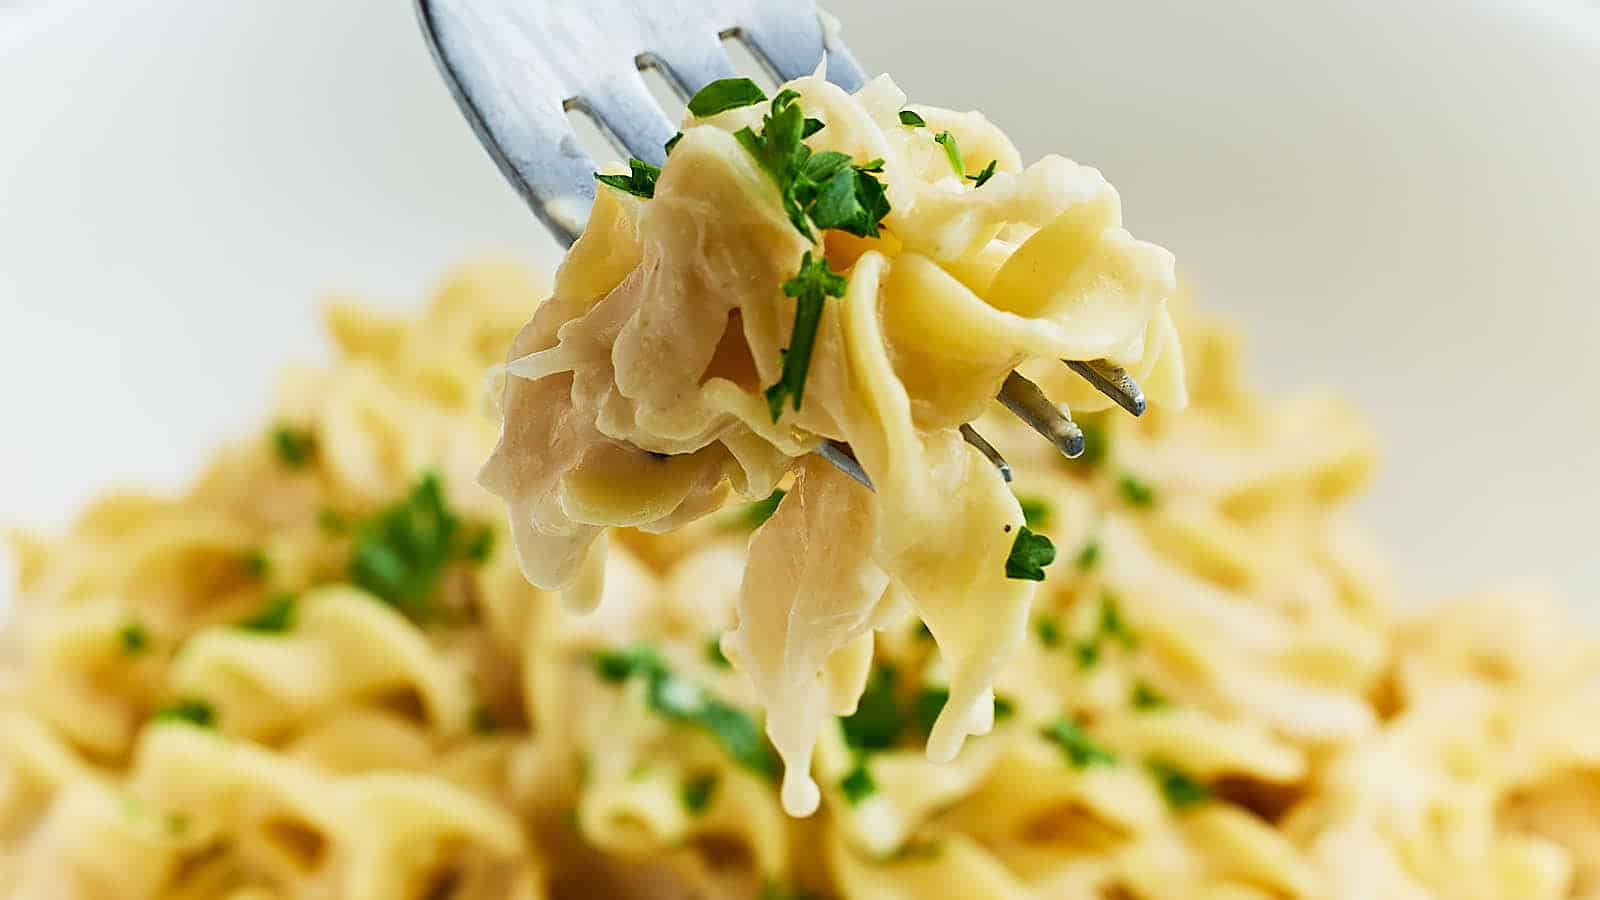 French Onion Pasta recipe by Cheerful Cook.